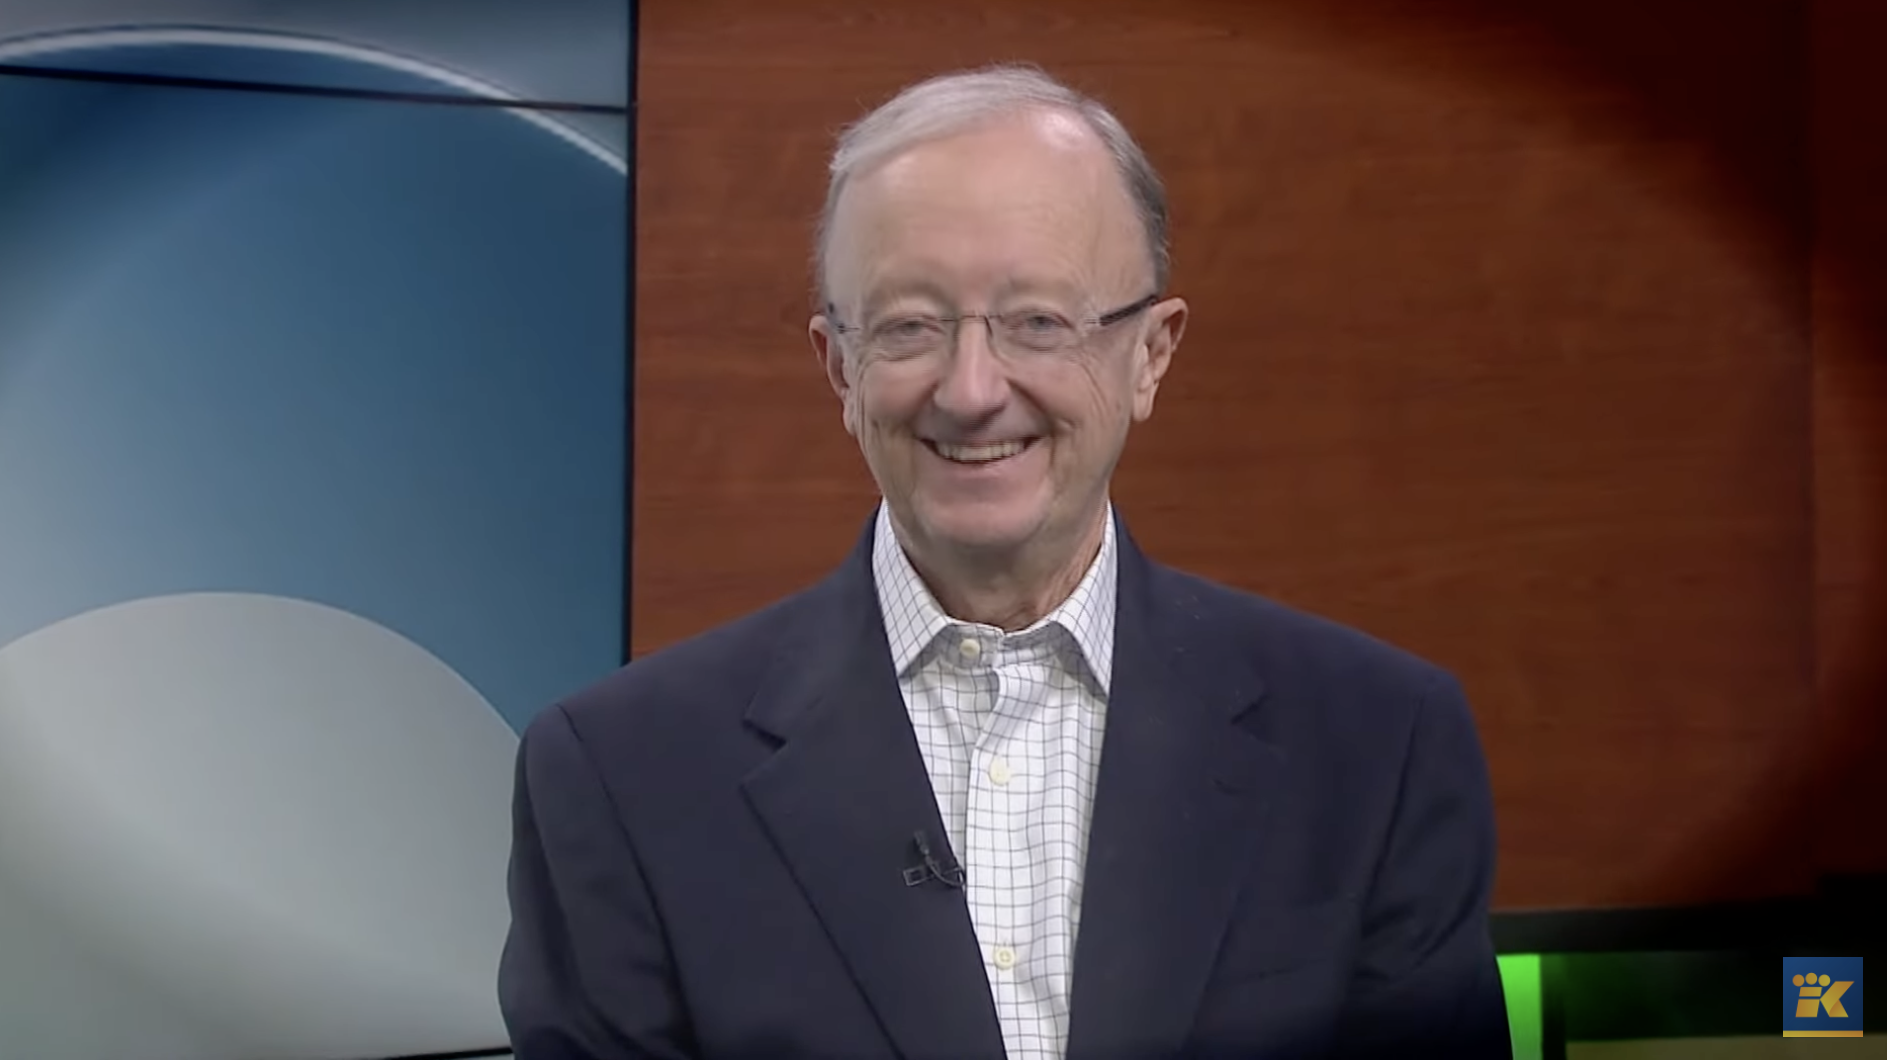 A photo of John Clayton. He is sitting in a TV studio, wearing a suit, and smiling.